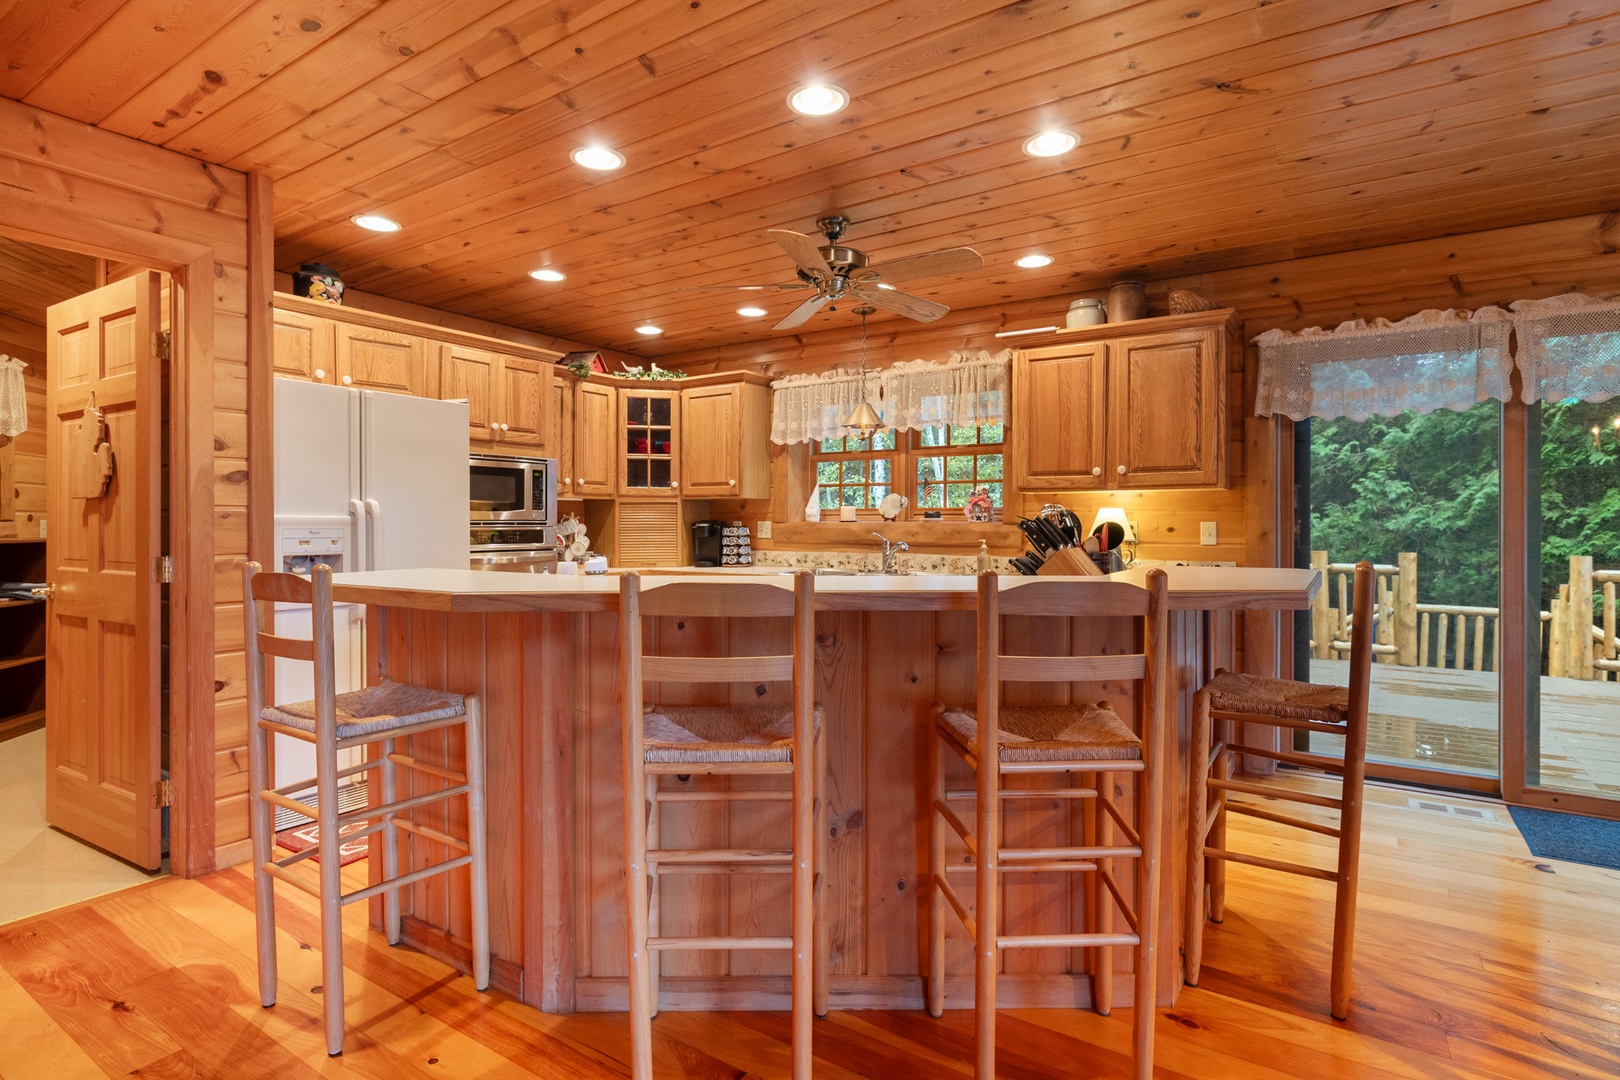 Each morning, this custom kitchen island becomes coffee lovers' Central Station.